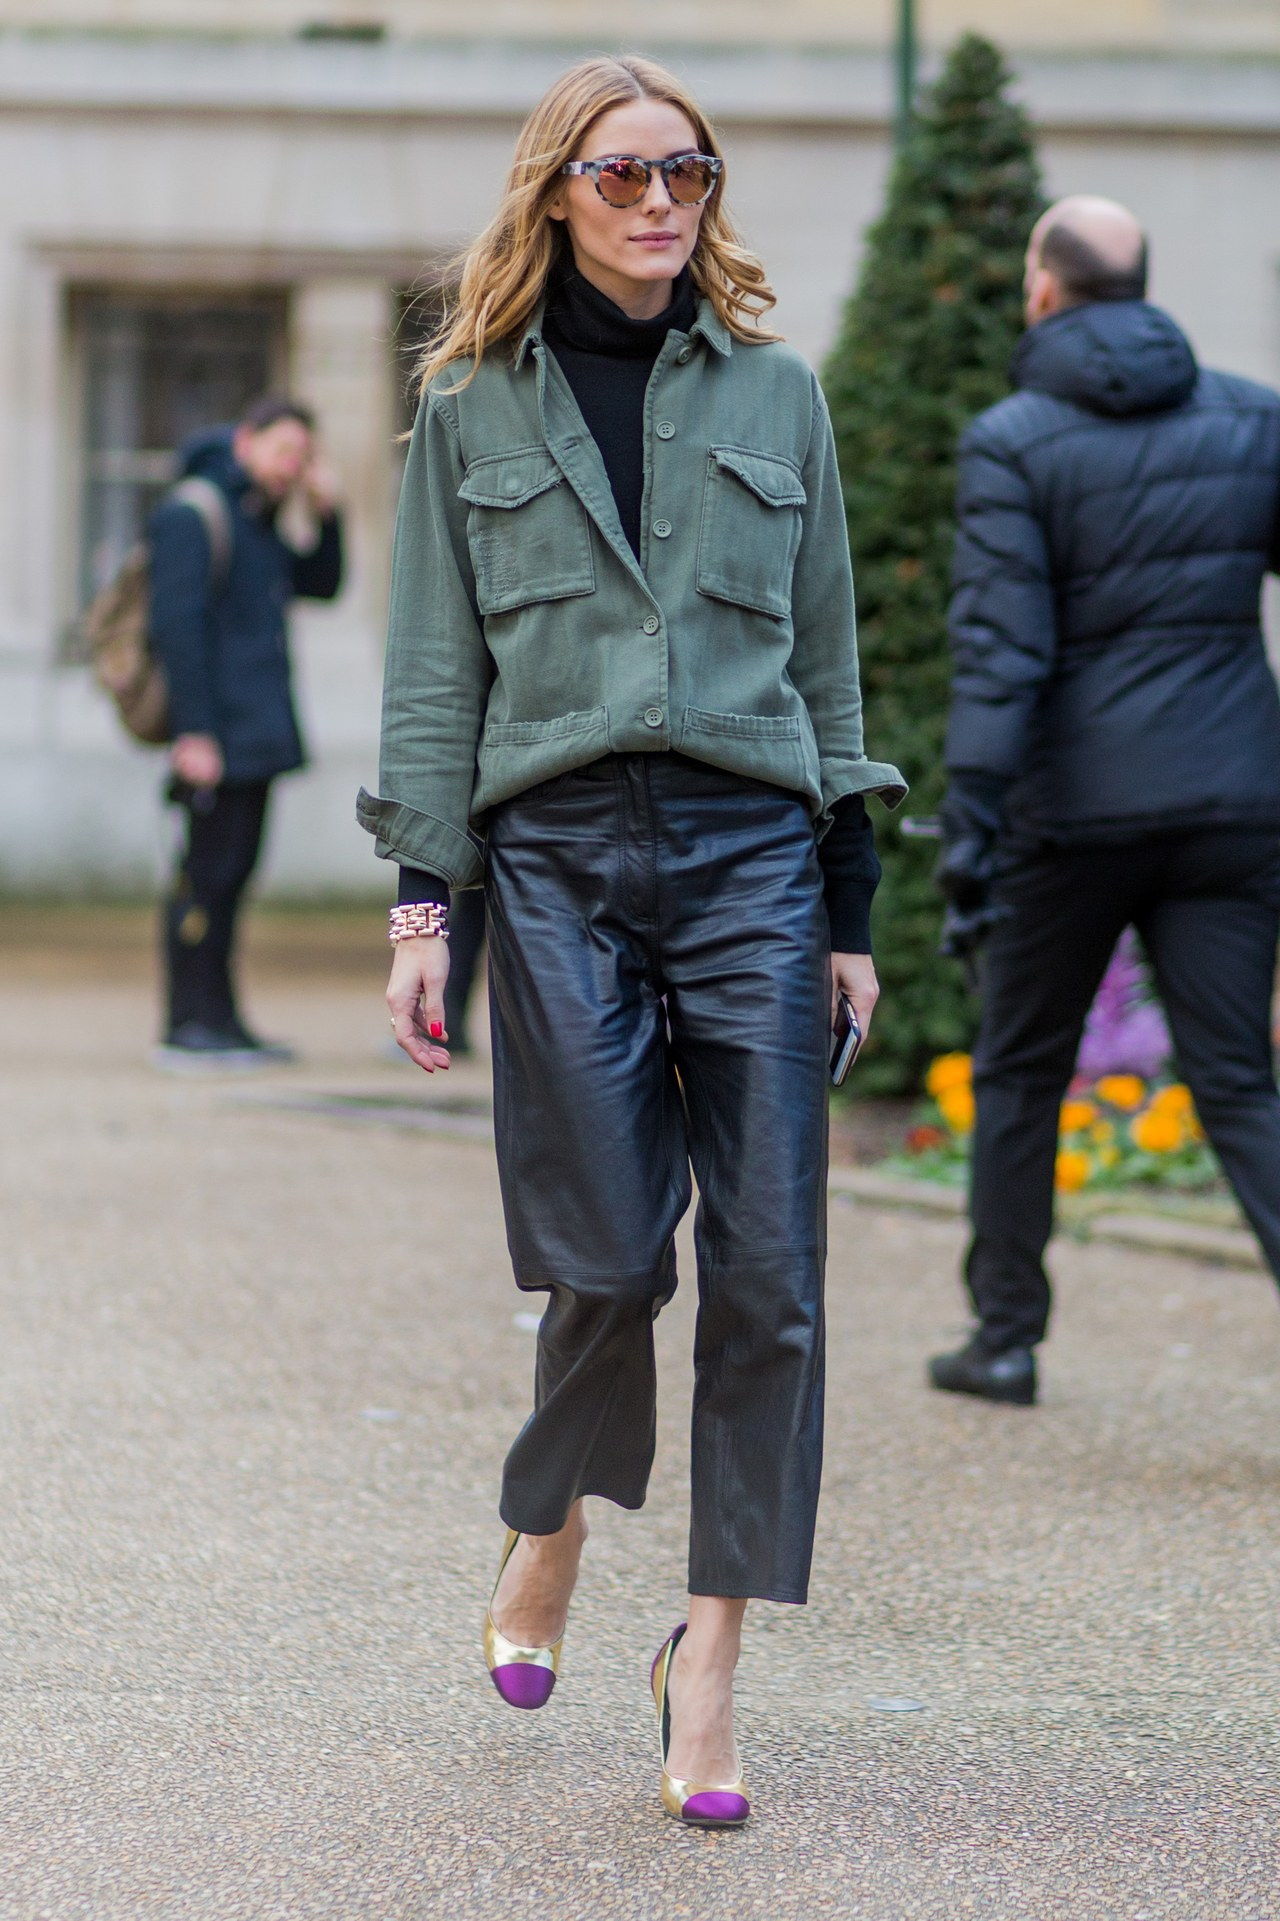 PARIS, FRANCE - March 07: Olivia Palermo wearing a green jacket and black leather pants outside Giambattista Valli during the Paris Fashion Week Womenswear Fall/Winter 2016/2017 on March 7, 2016 in Paris, France. (Photo by Christian Vierig/Getty Images)